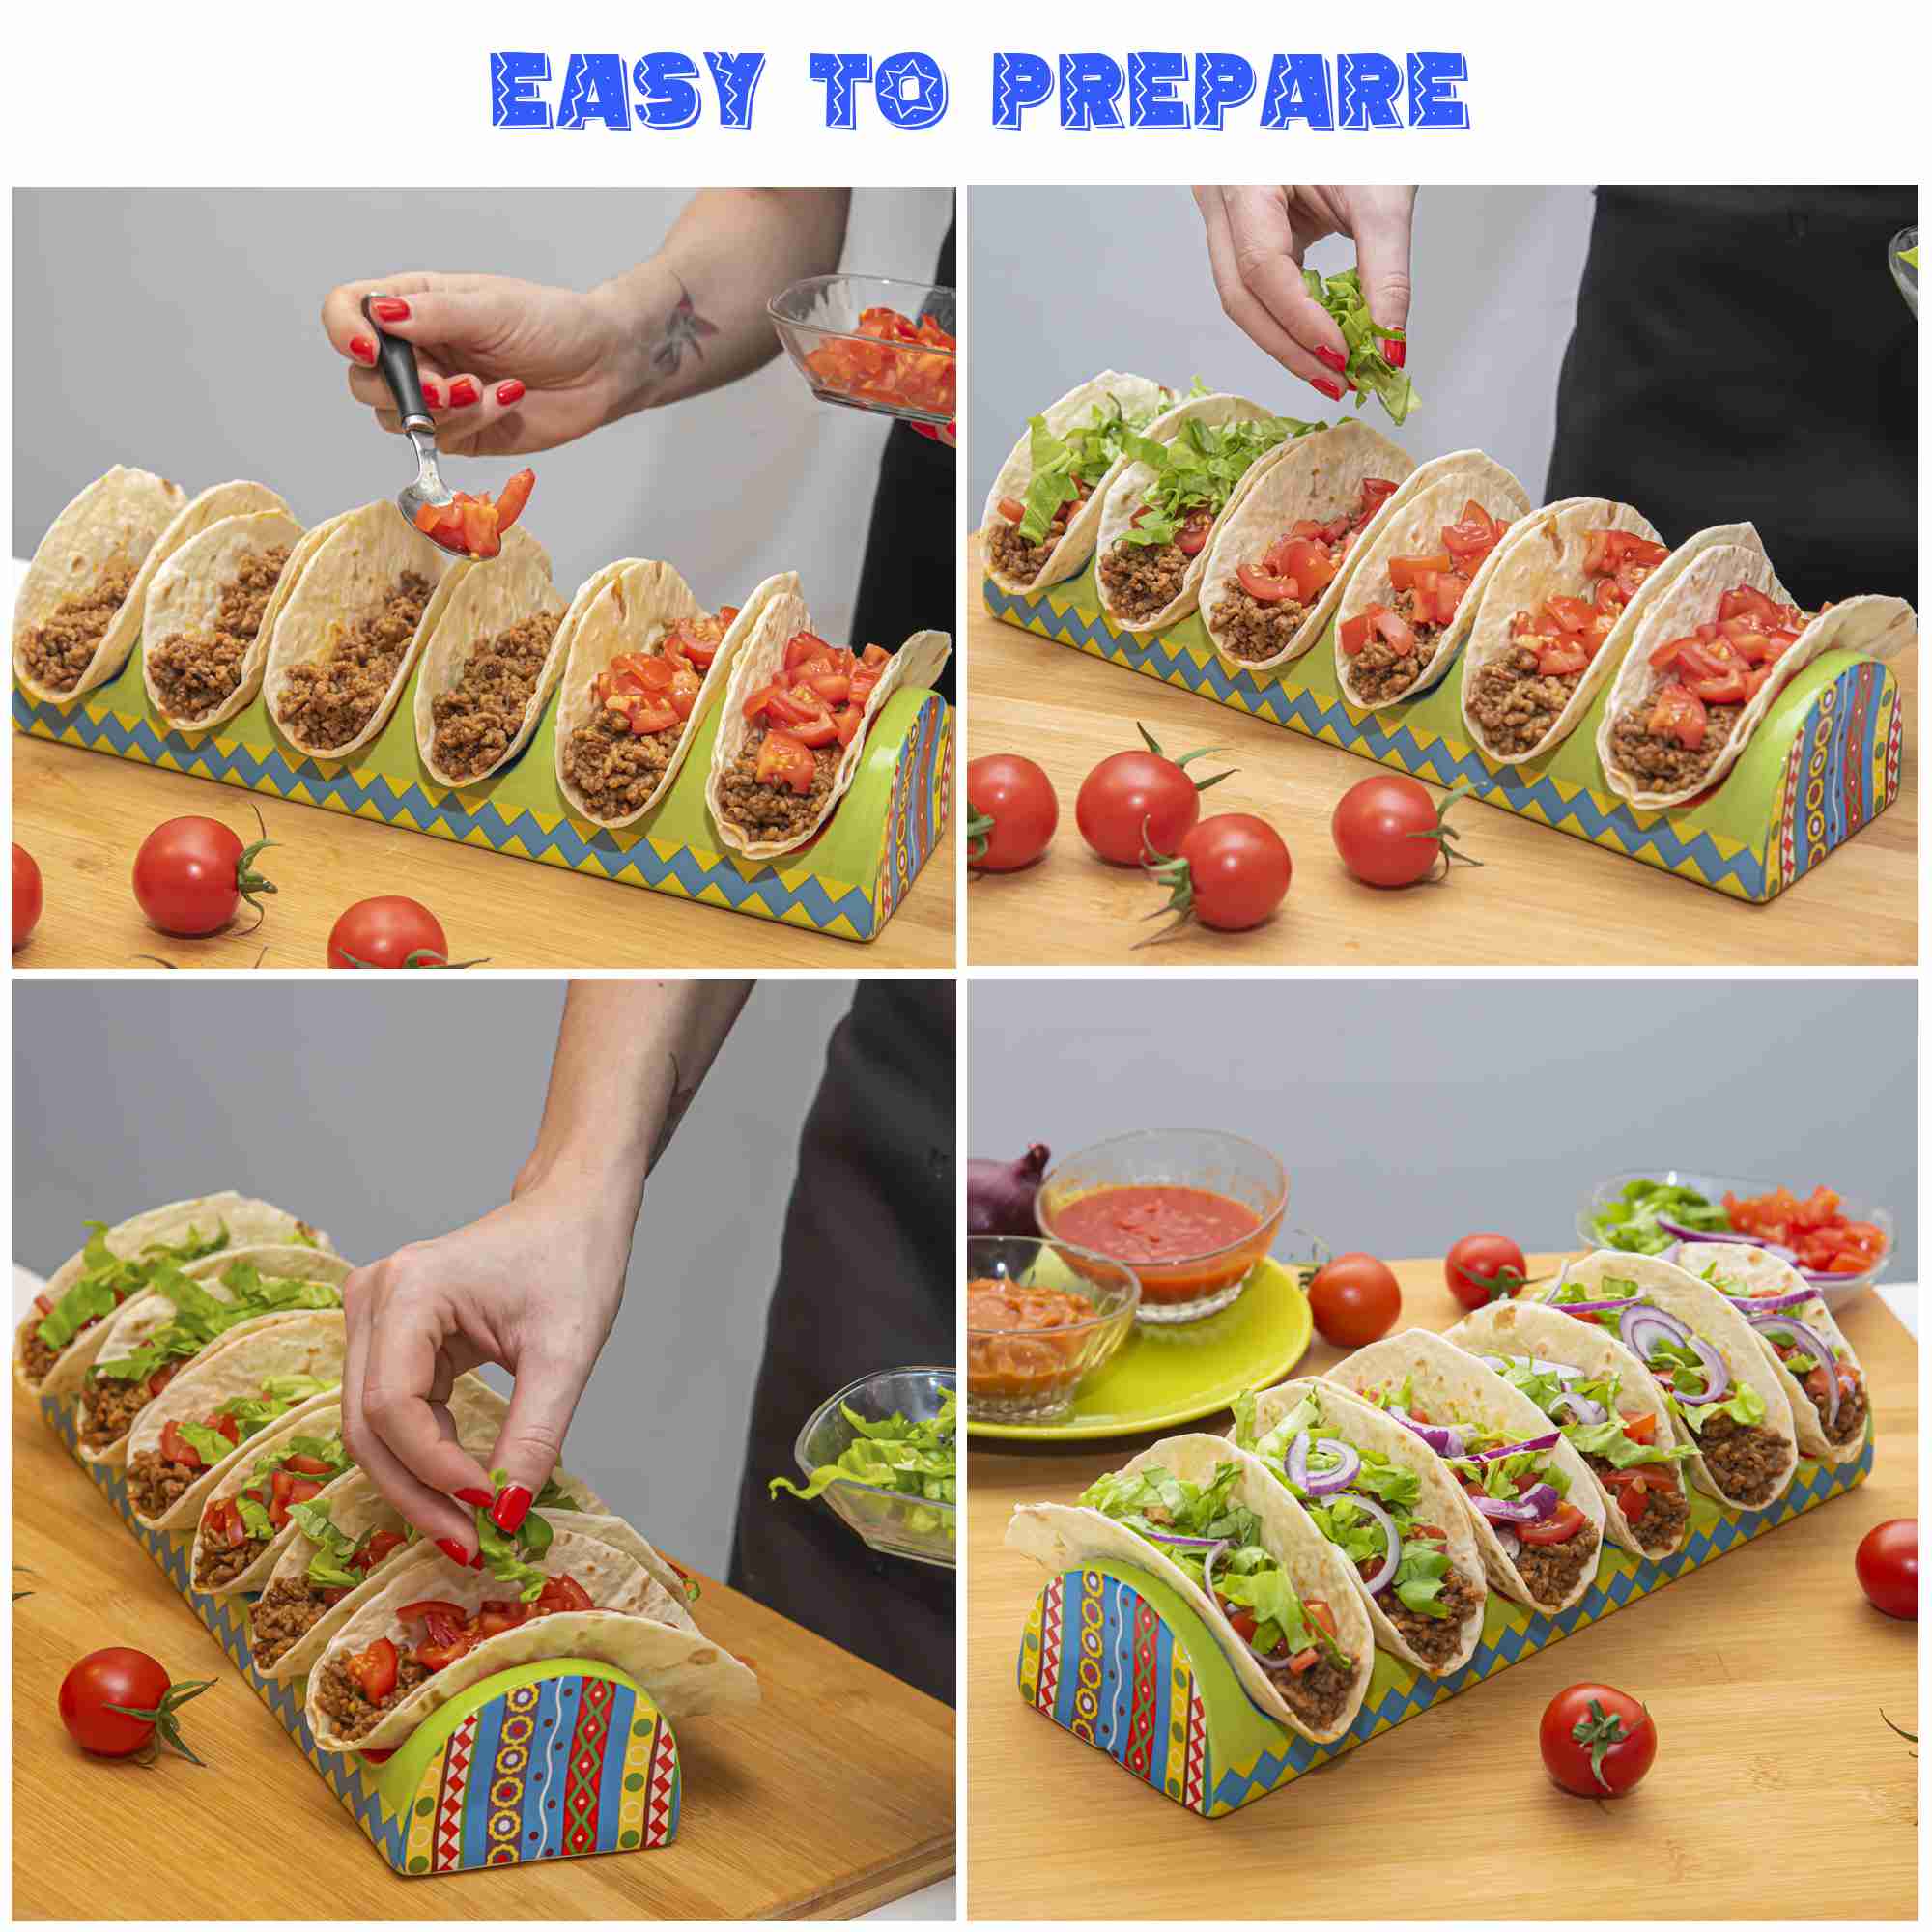 Taco-Holders for cheap